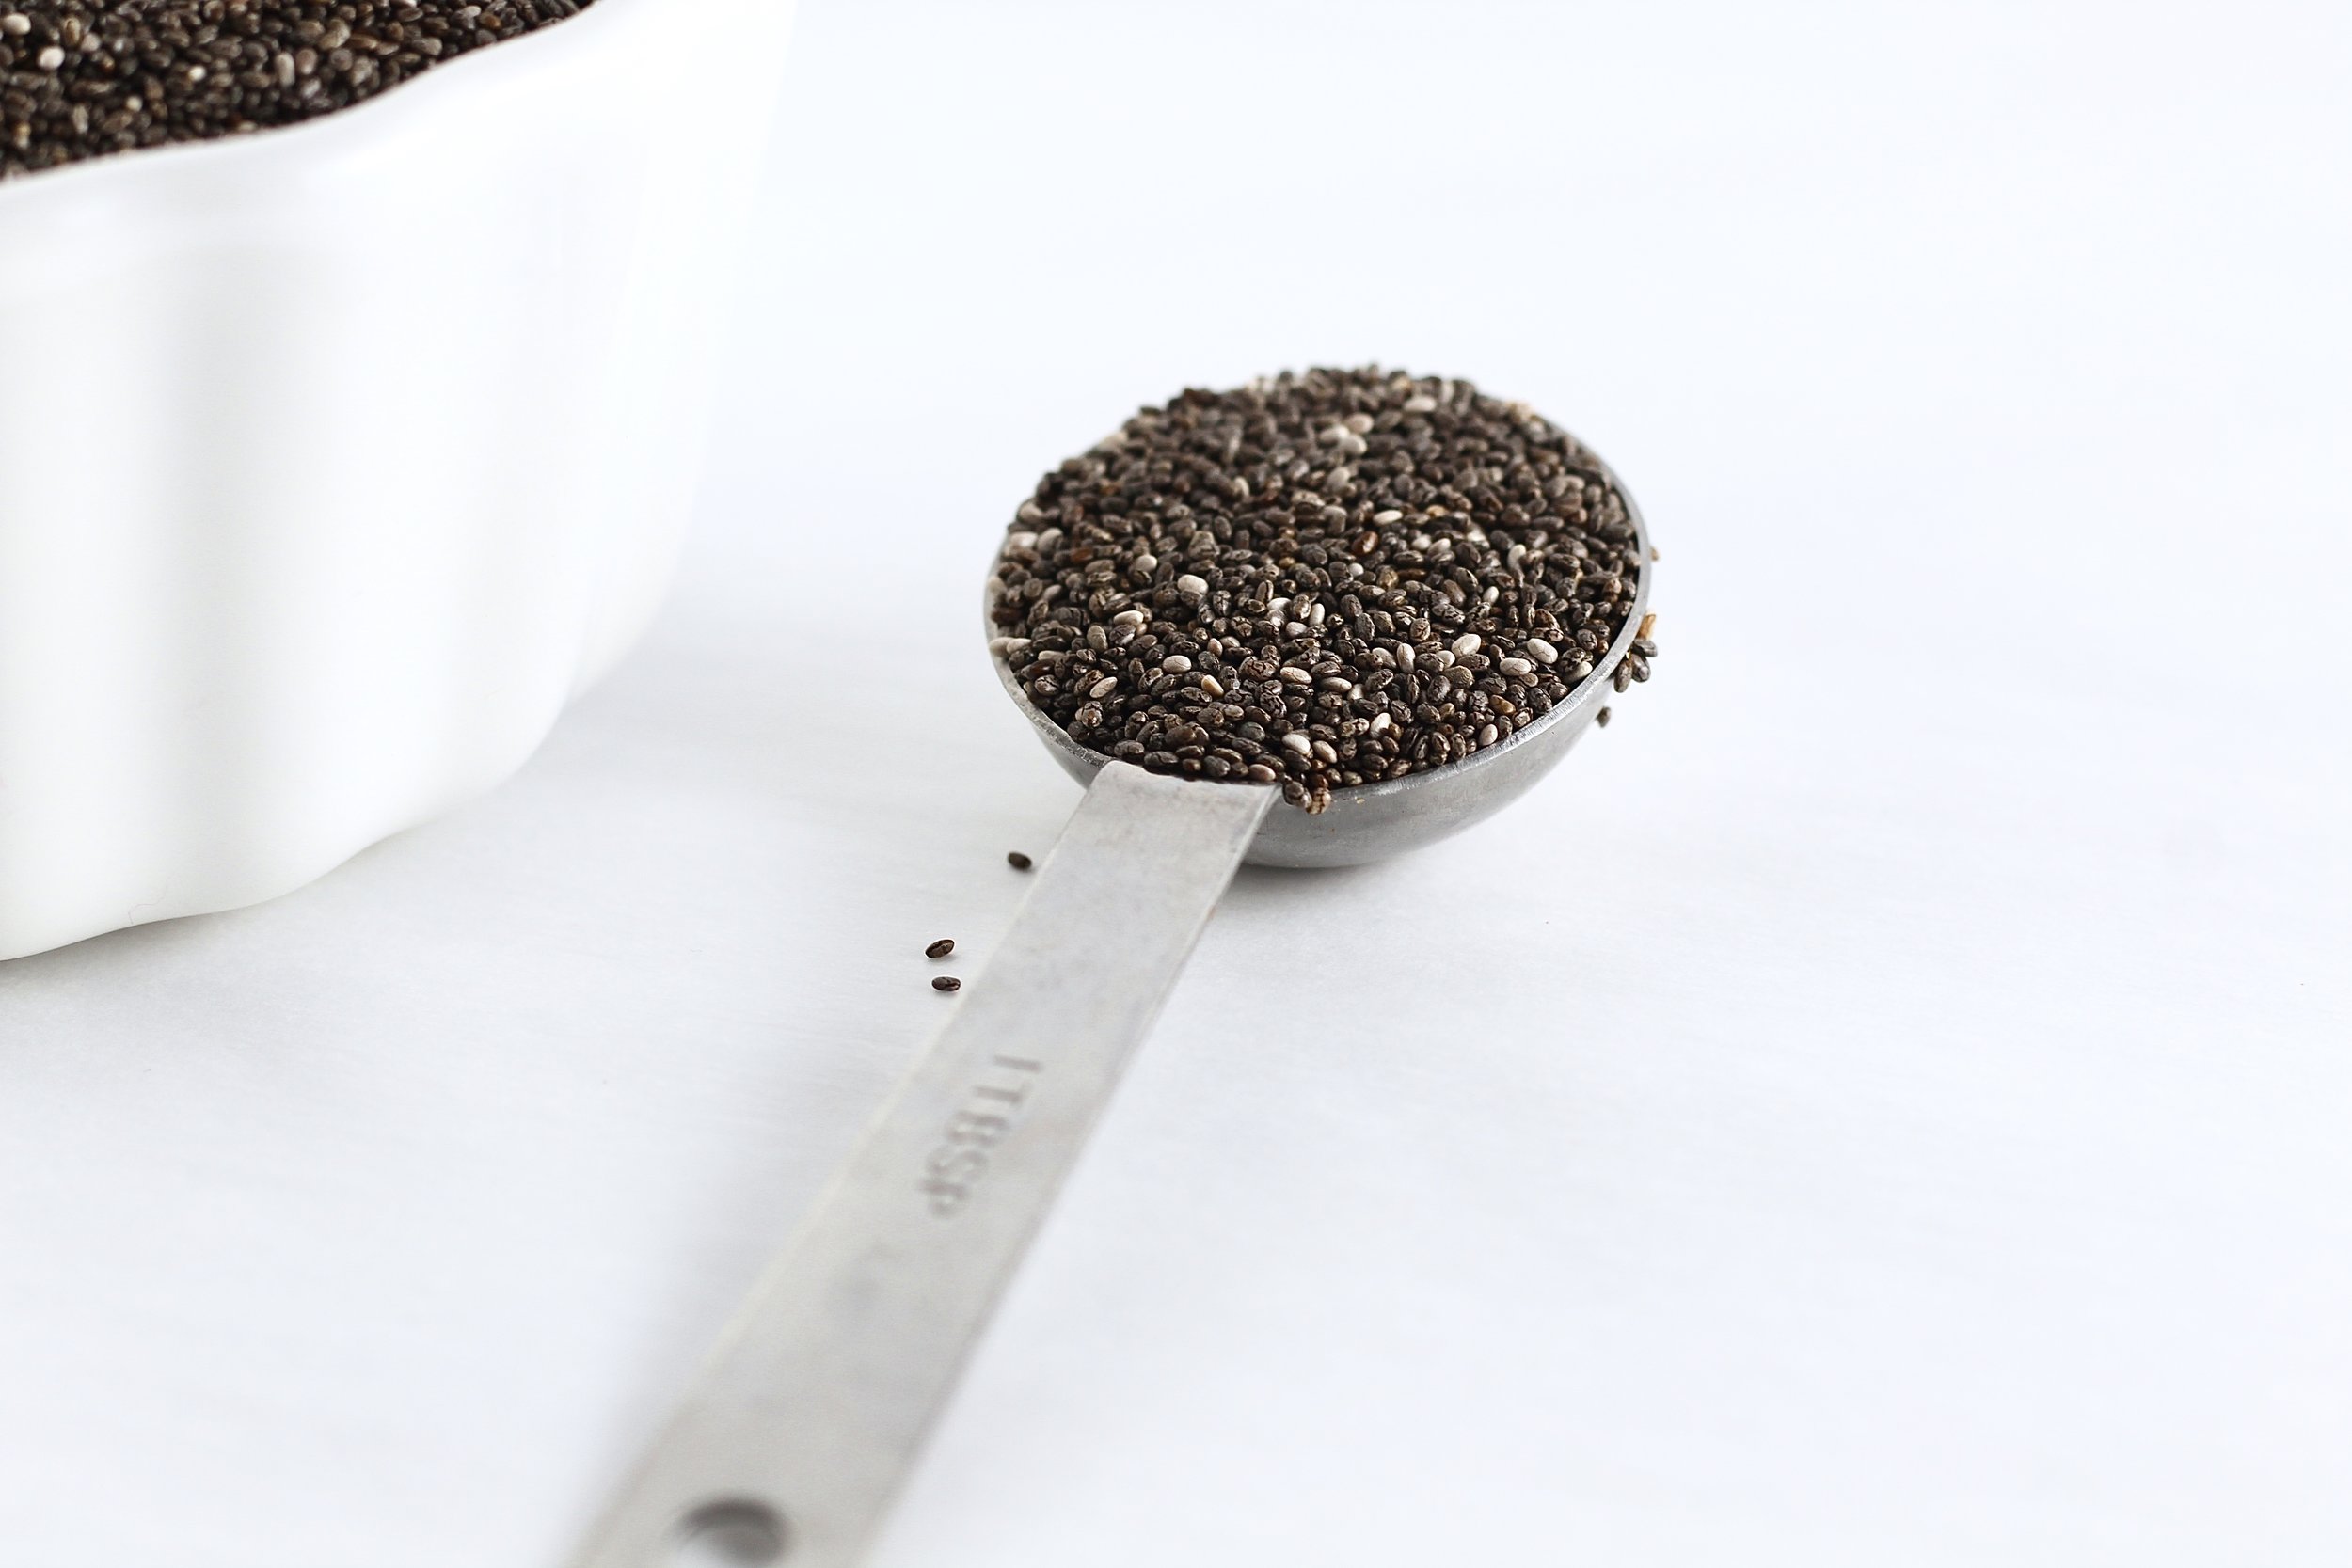  14 fun facts about chia seeds 